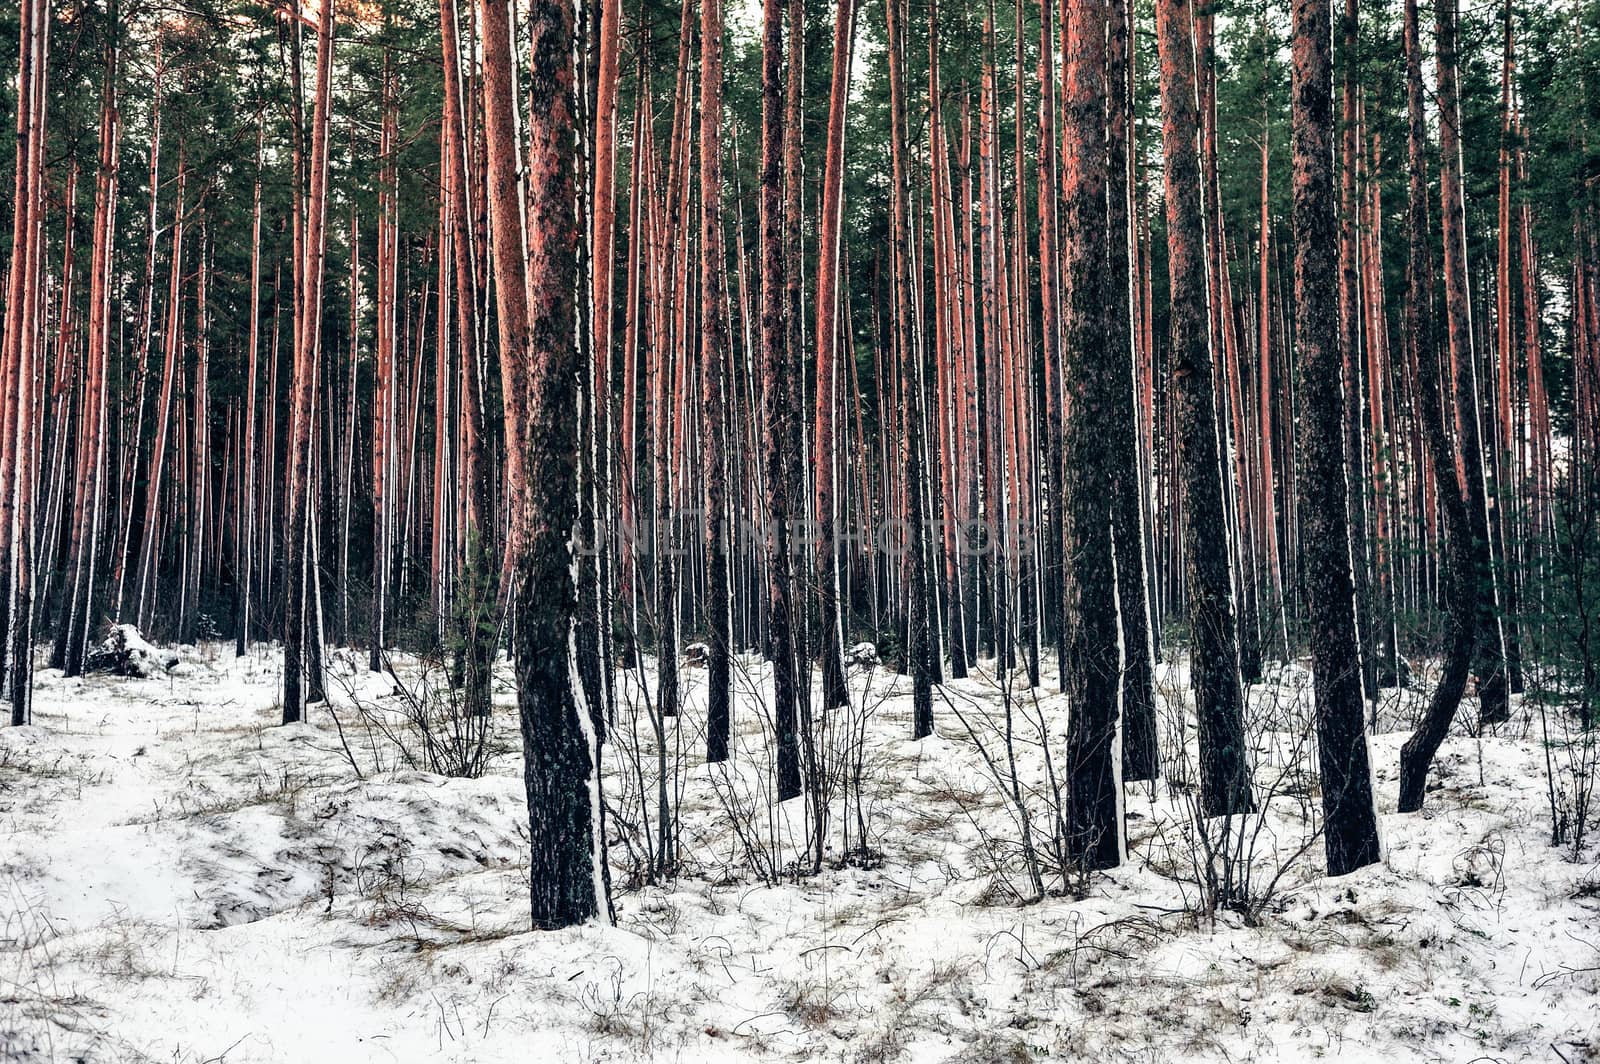 Northern pines by styf22